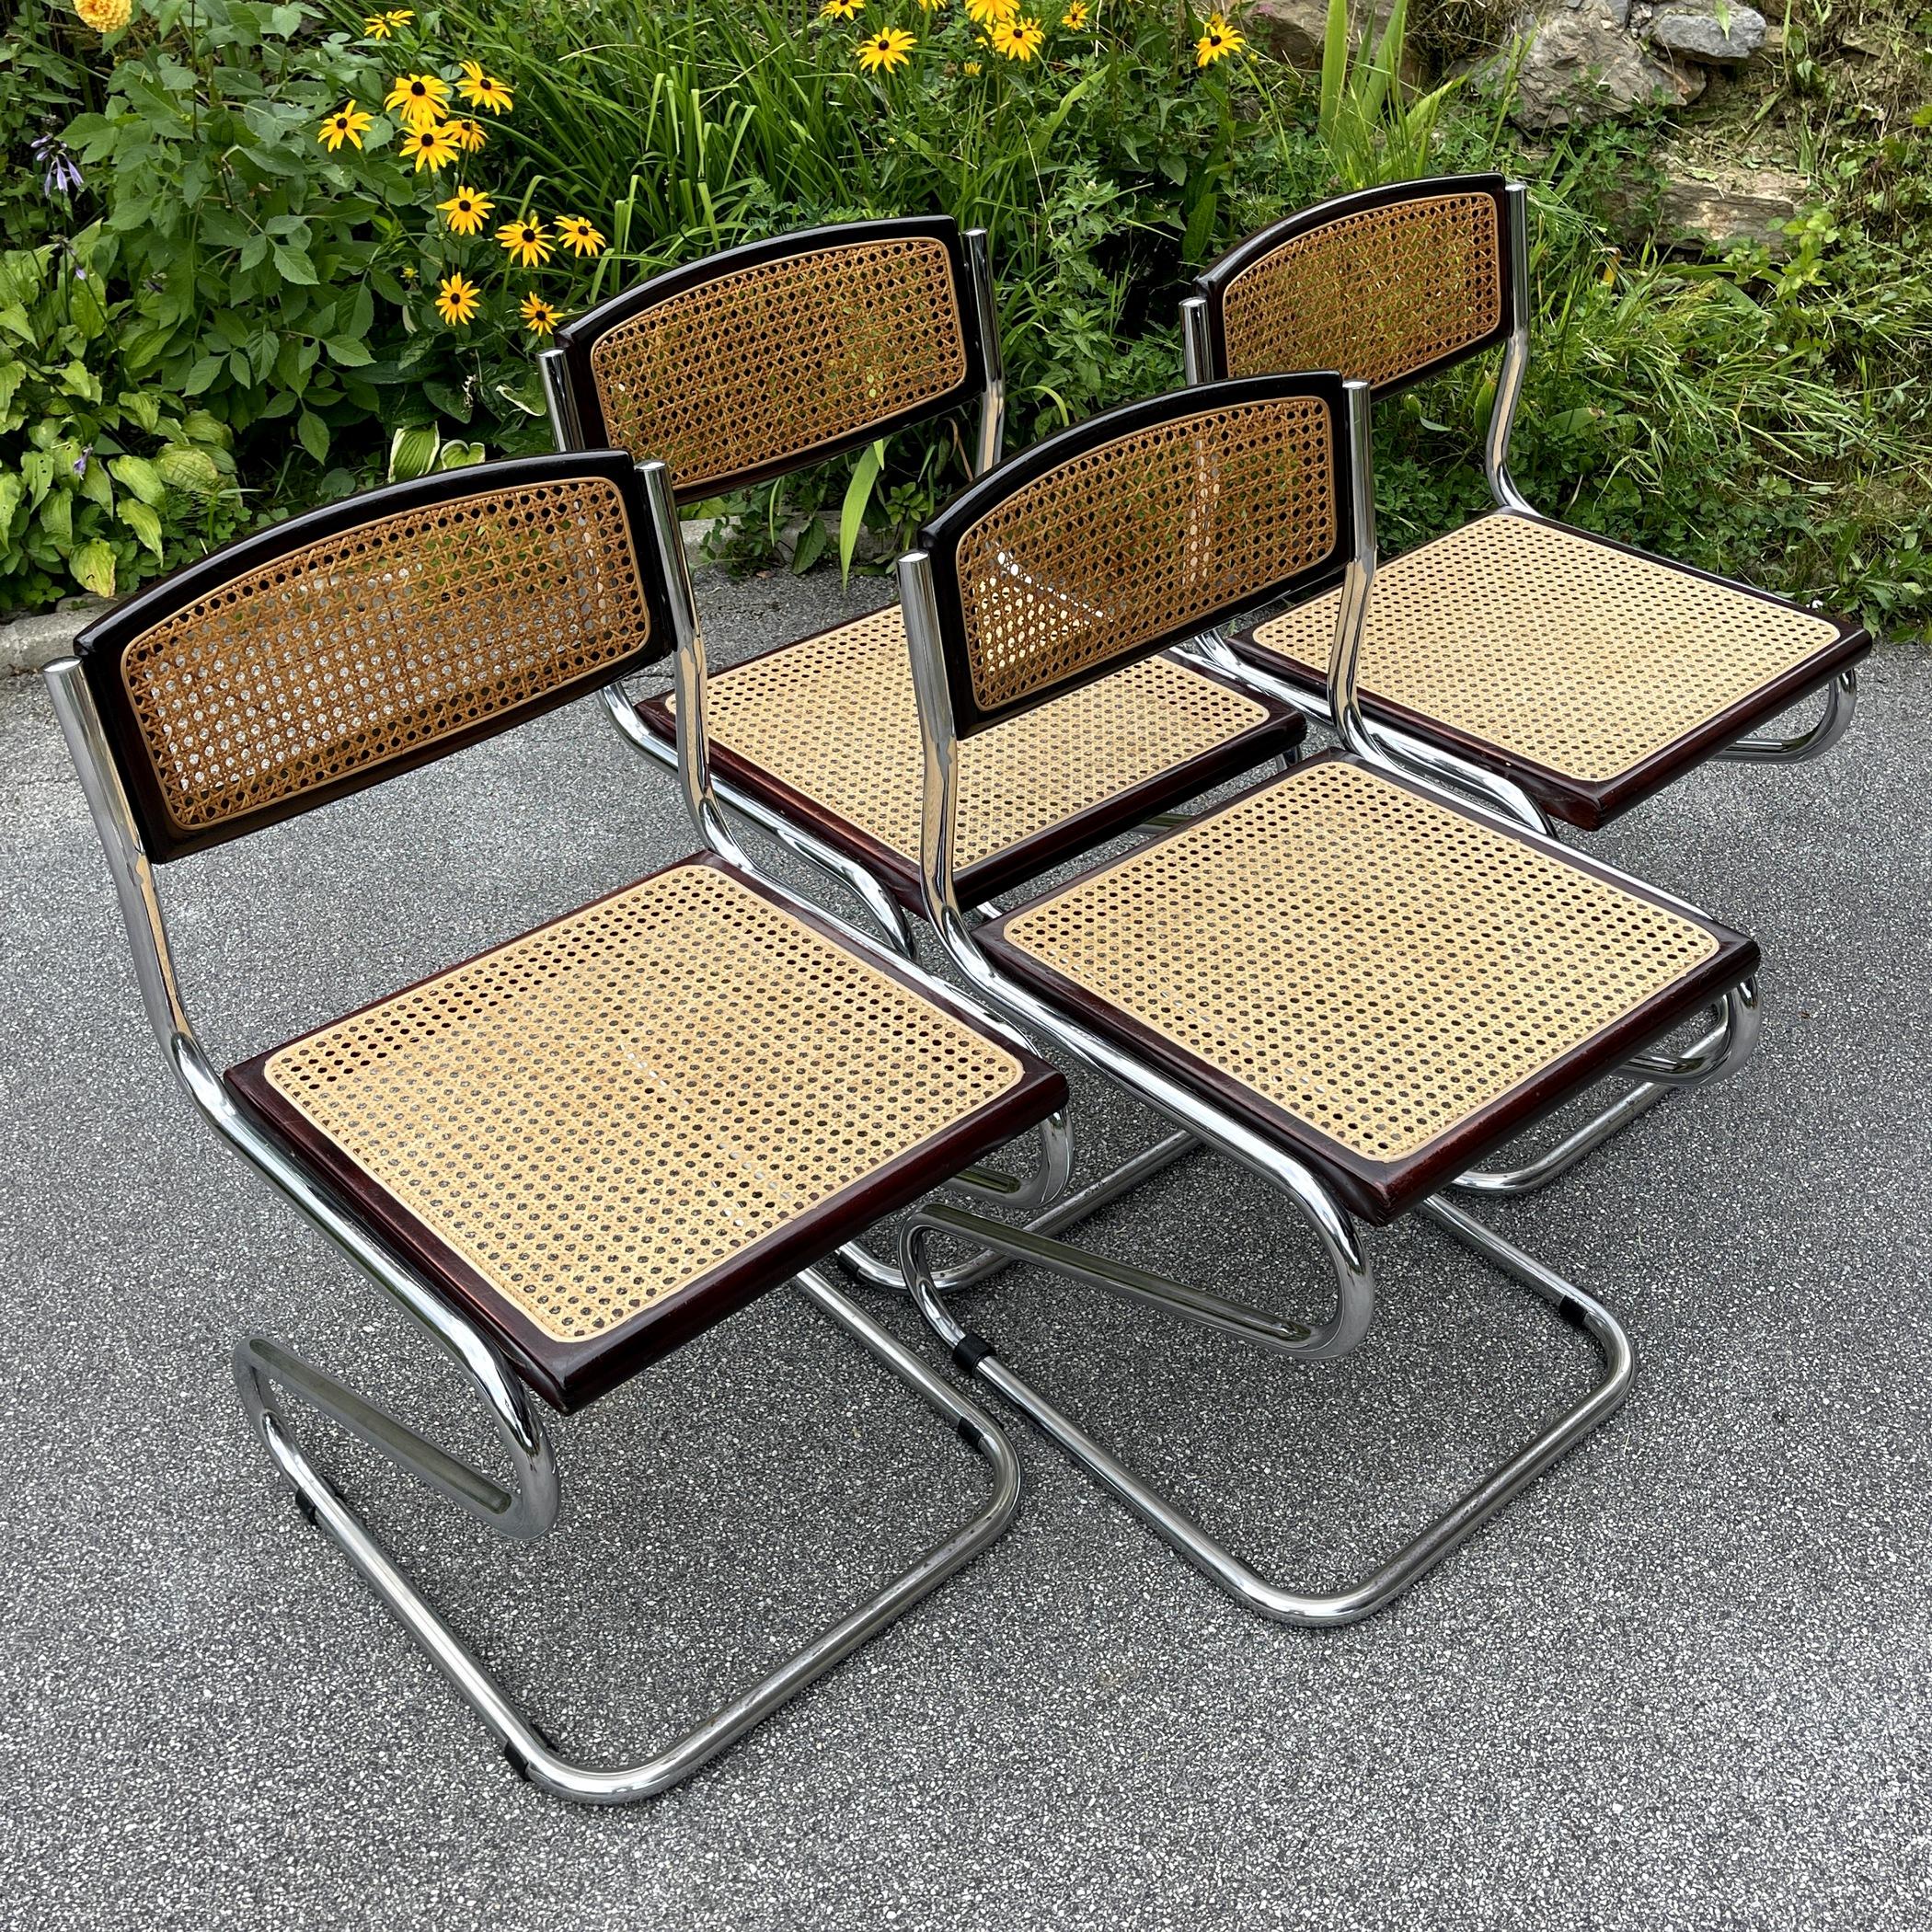 Extremely comfortable and amazing chairs Cesca style. The design was developed by Marcel Breuer in 1928. These chairs were made in Italy in the 1970s. Preserved in excellent condition. The original mesh made of natural rattan has not torn. The